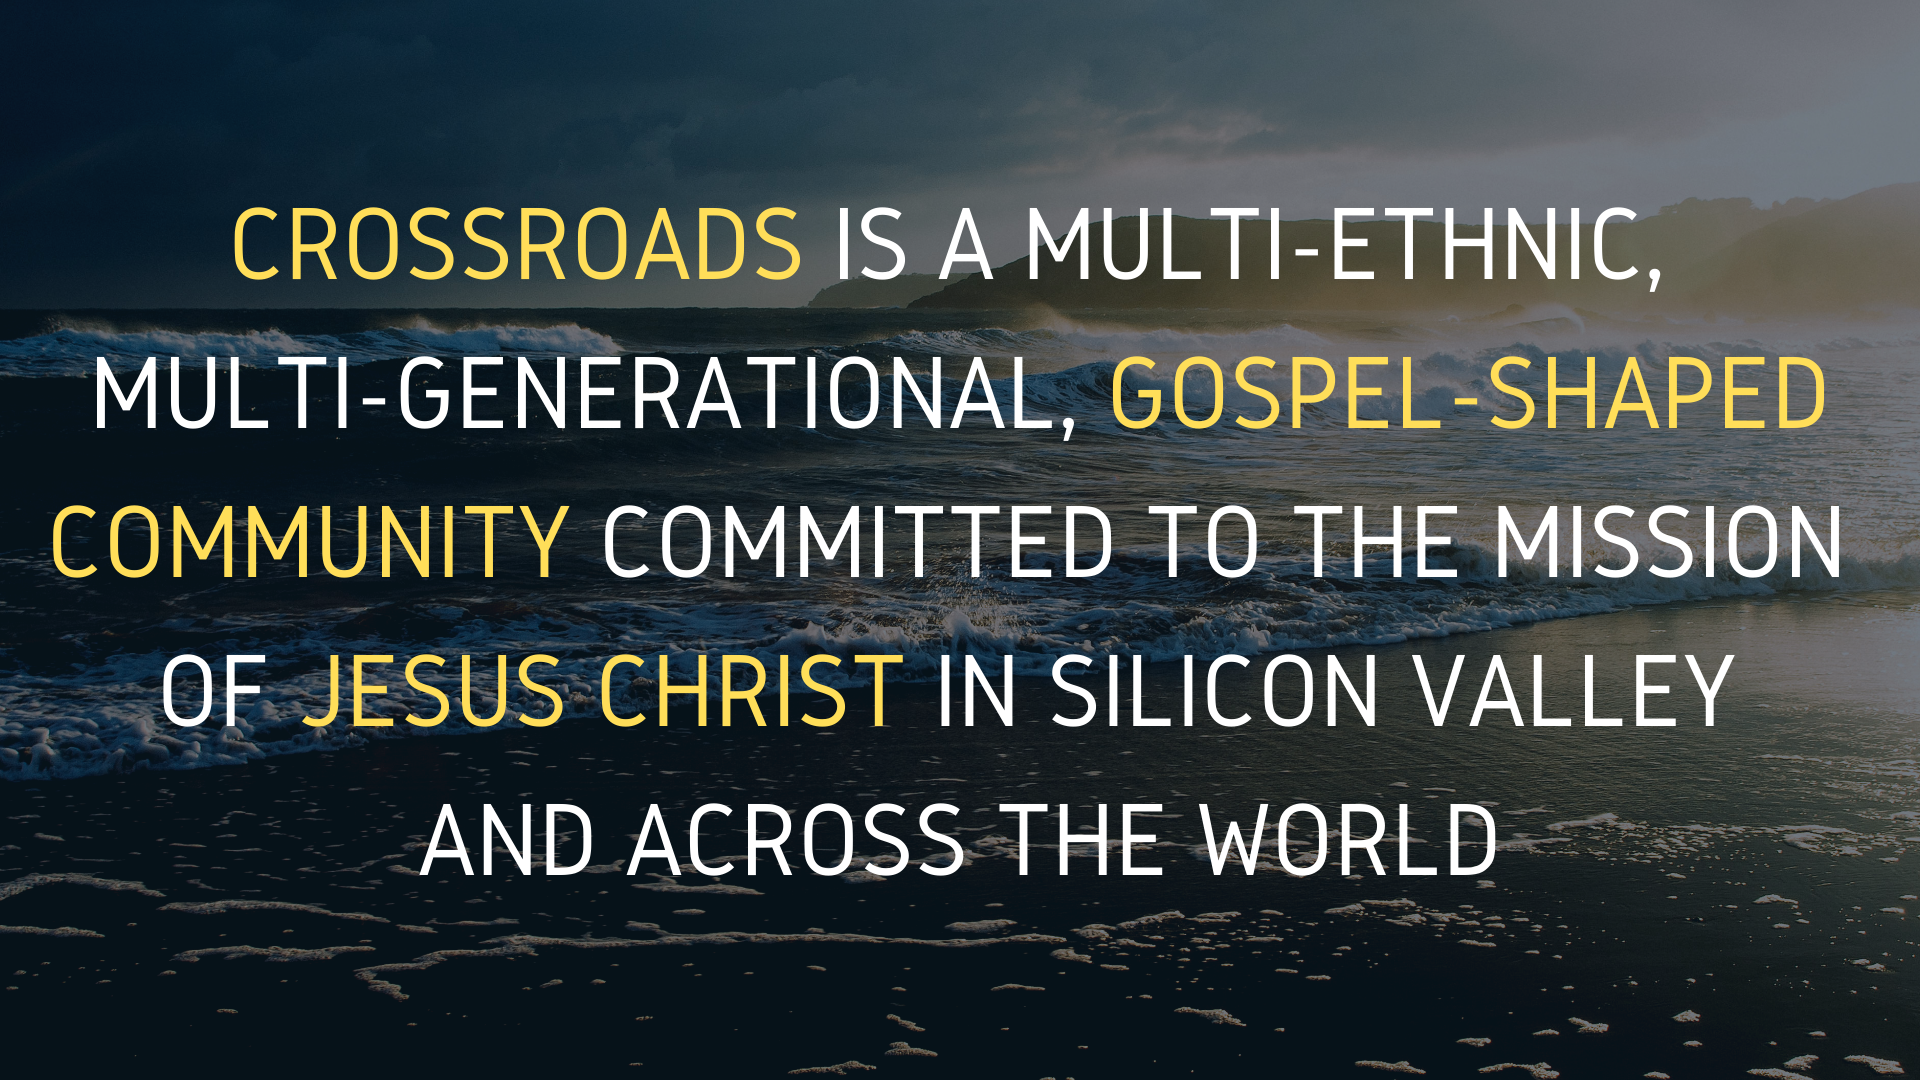 CRossroads is a multi-ethnic, multi-generational Gospel shaped community committed to the mission of Jesus christ in the silicon valley and across the world.png